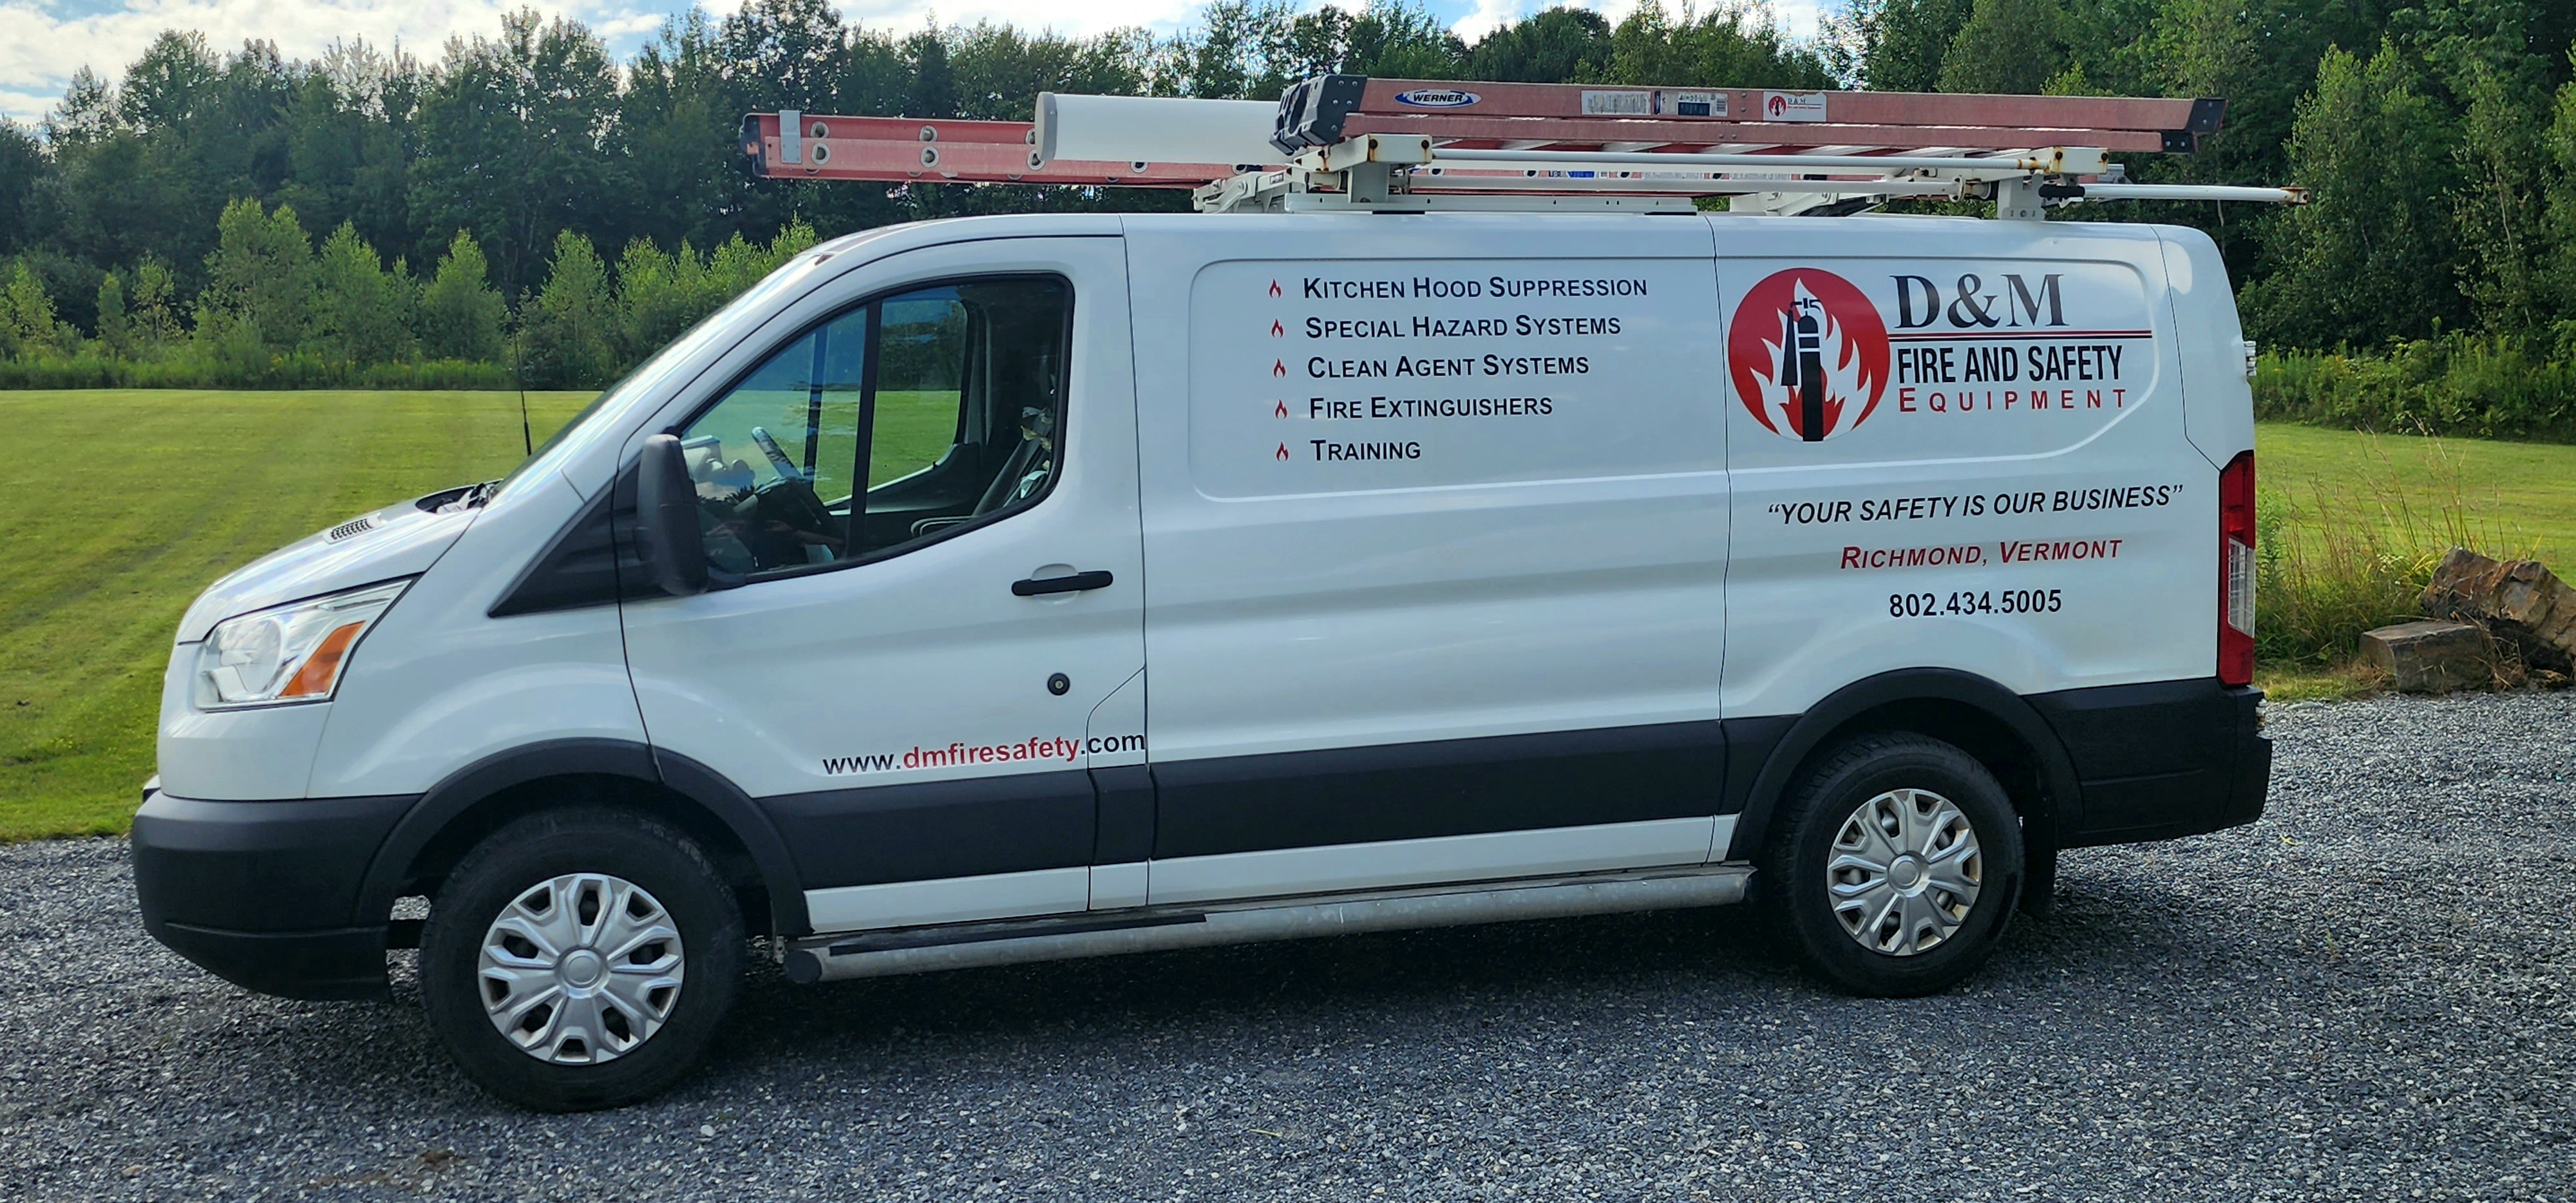 Fire safety and equipment Provider Van